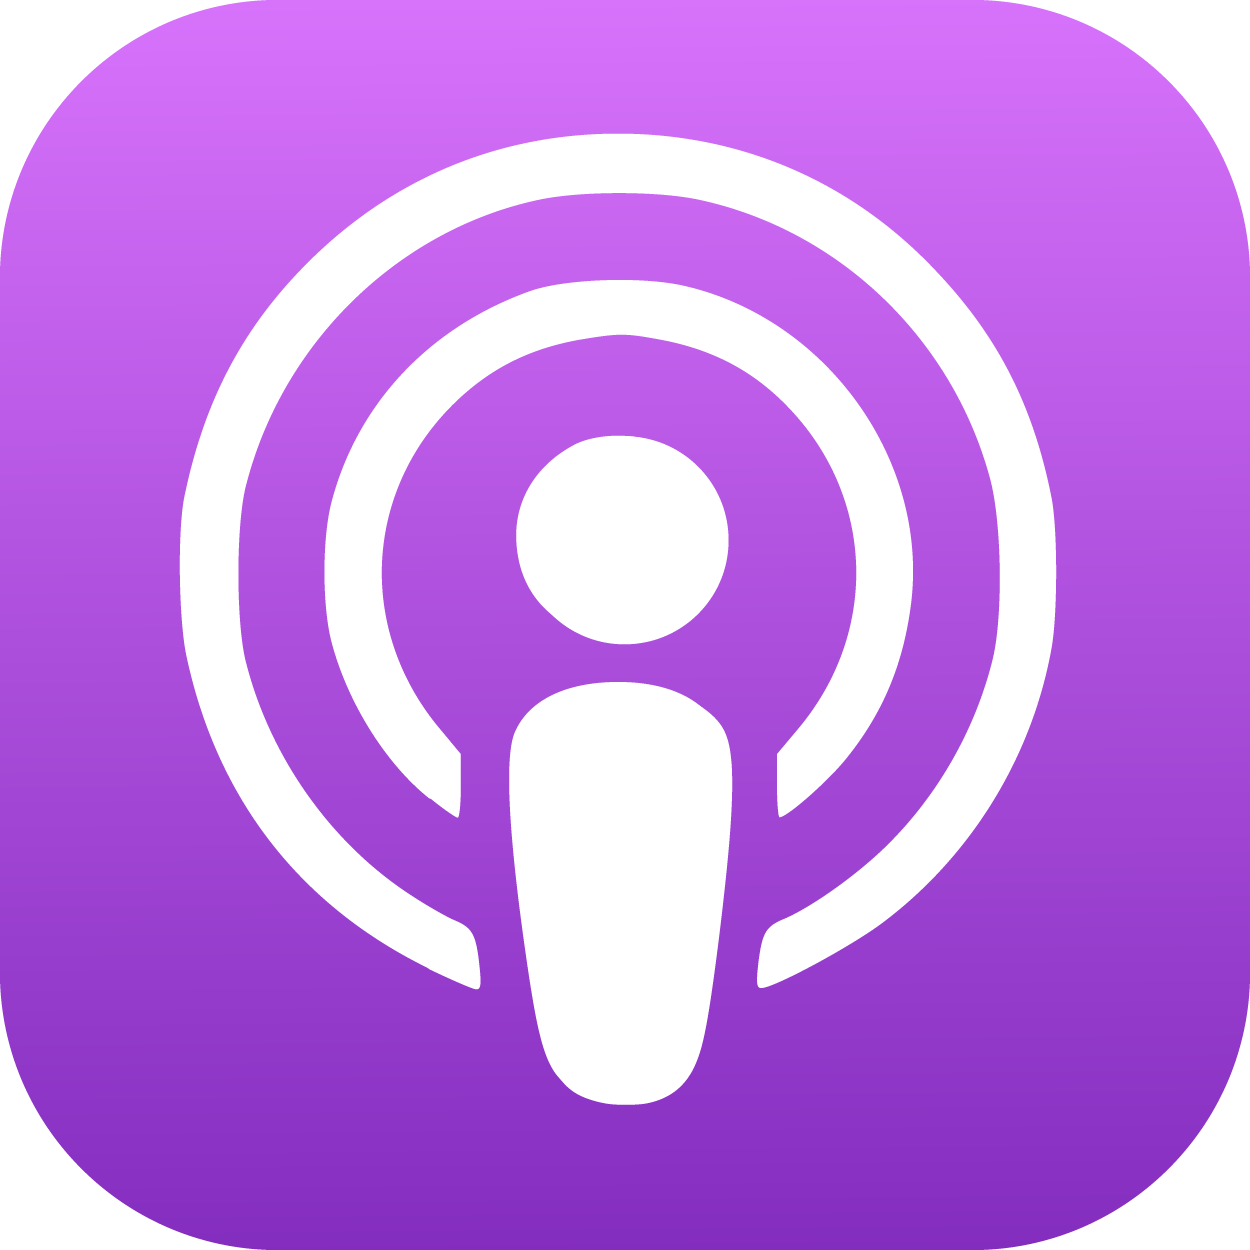 Listen to the podcast on Apple Podcasts